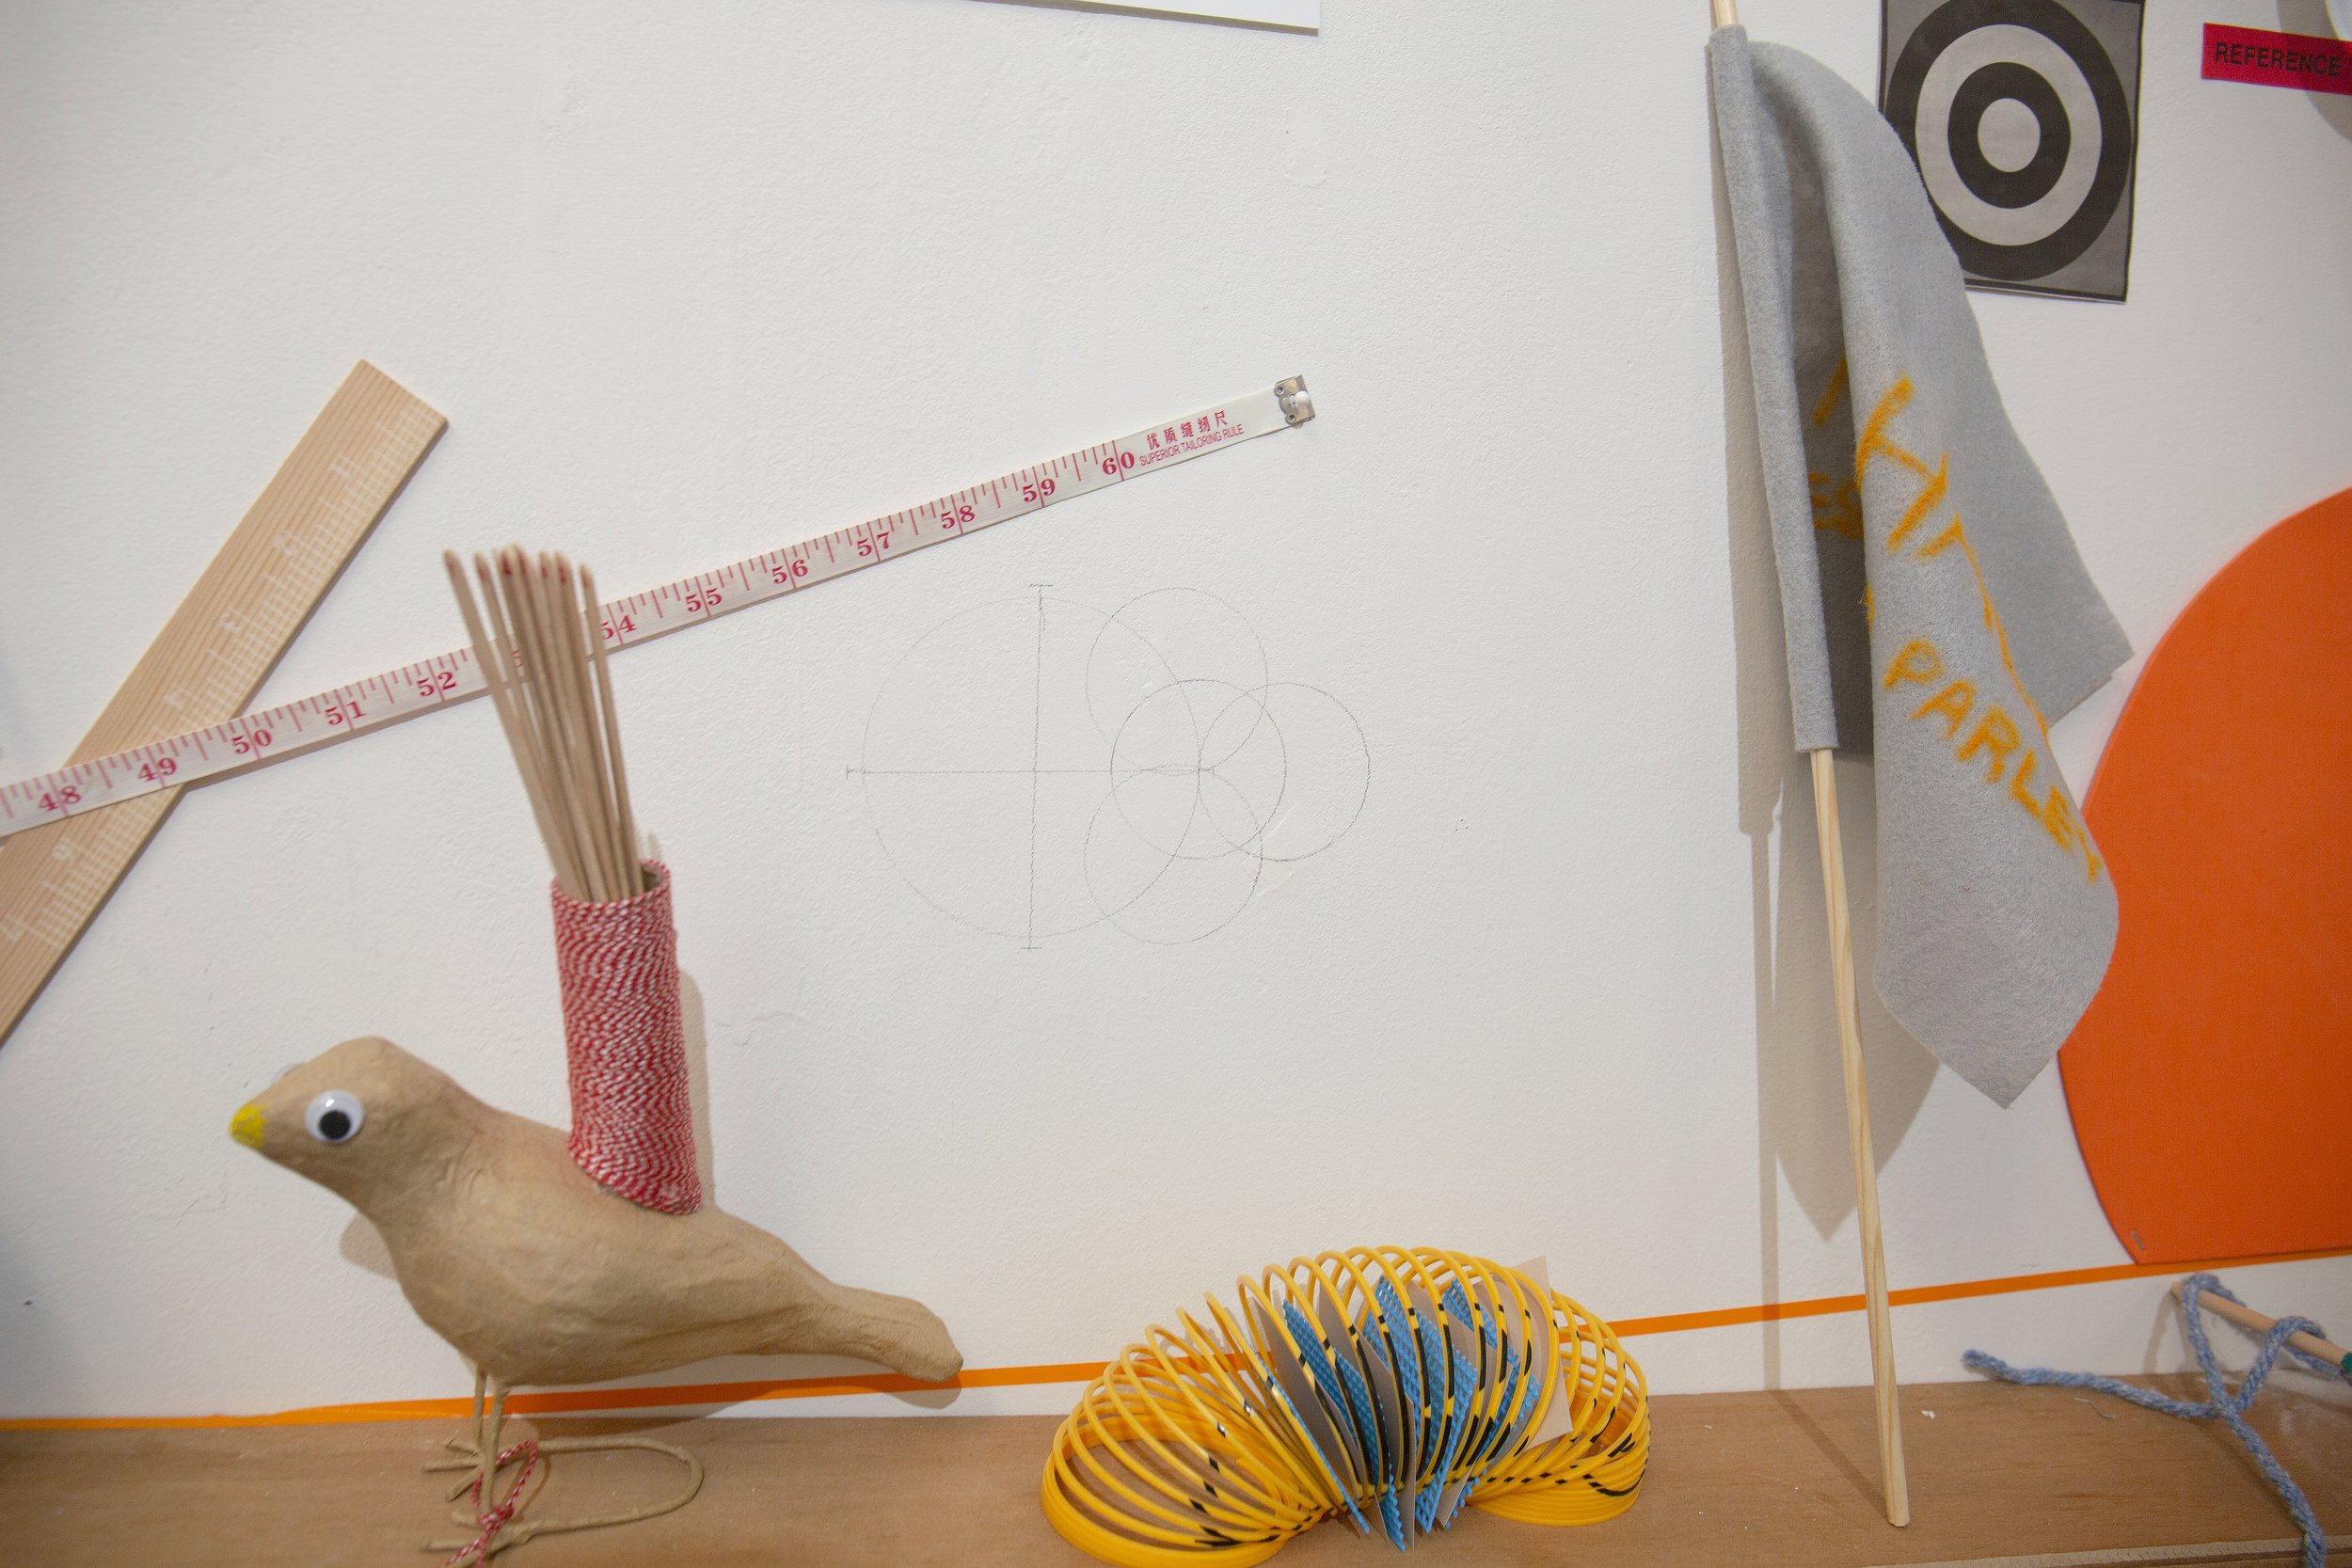 Part of the installation ("Fortune teller bird" and etc)